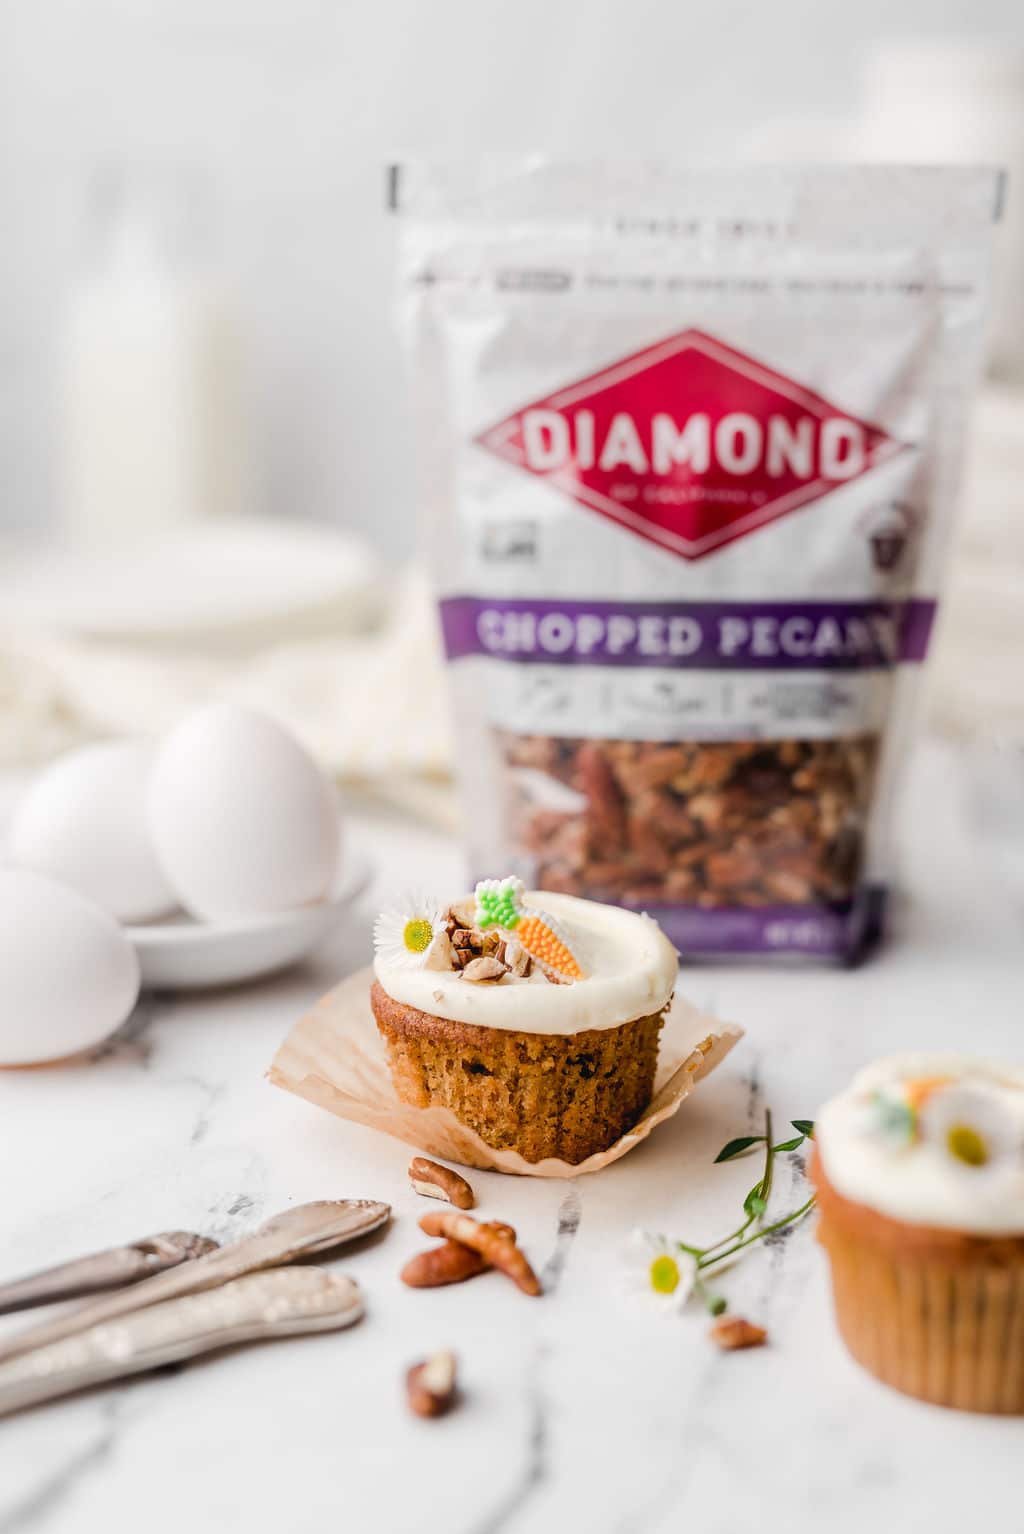 Decorated carrot cupcakes in front of bag of Diamond chopped pecans.